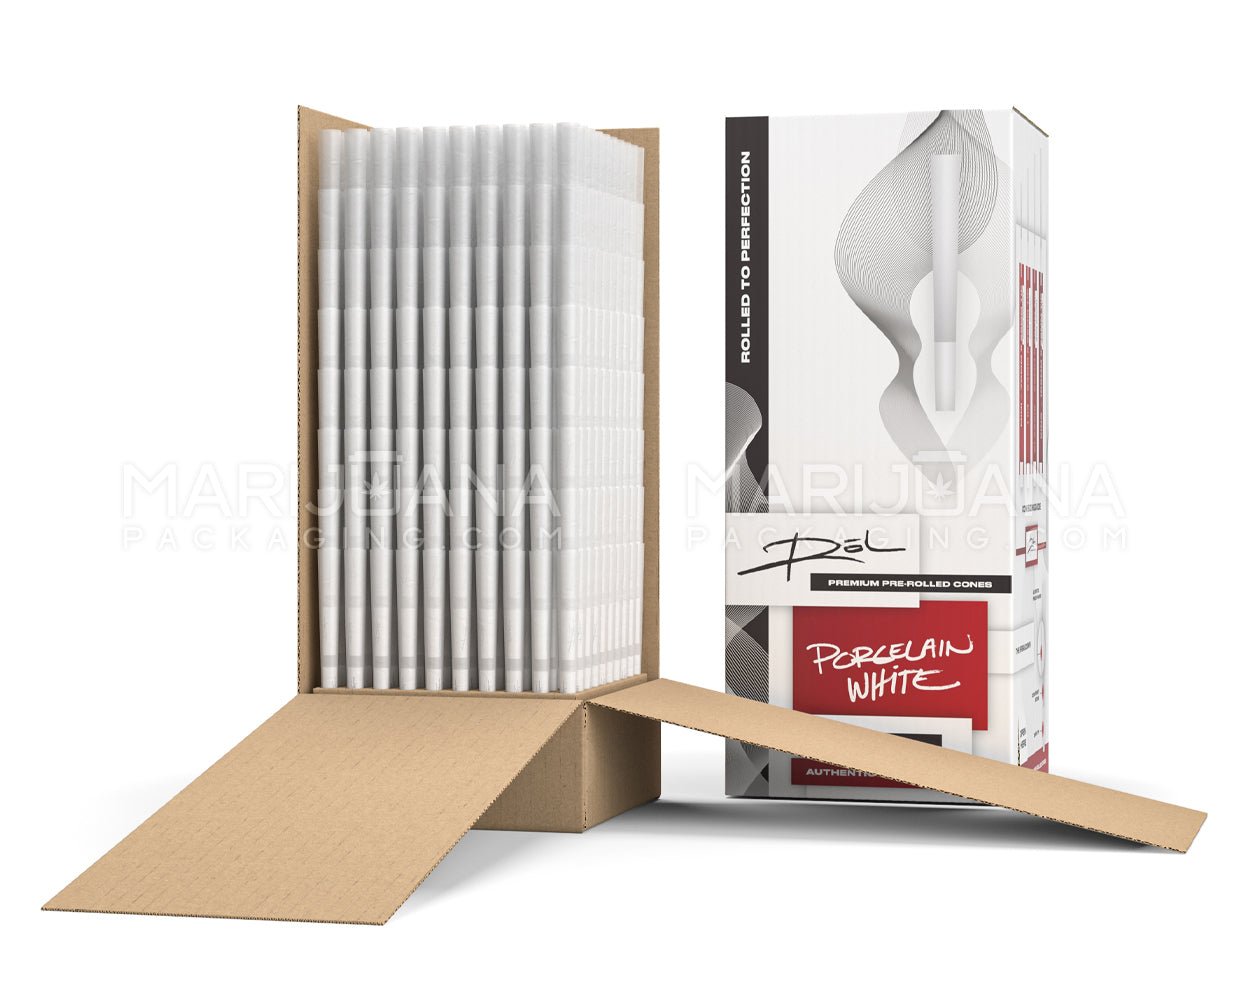 RōL | 98 Special Size Pre-Rolled Cones | 98mm - Porcelain White Paper - 800 Count - 4